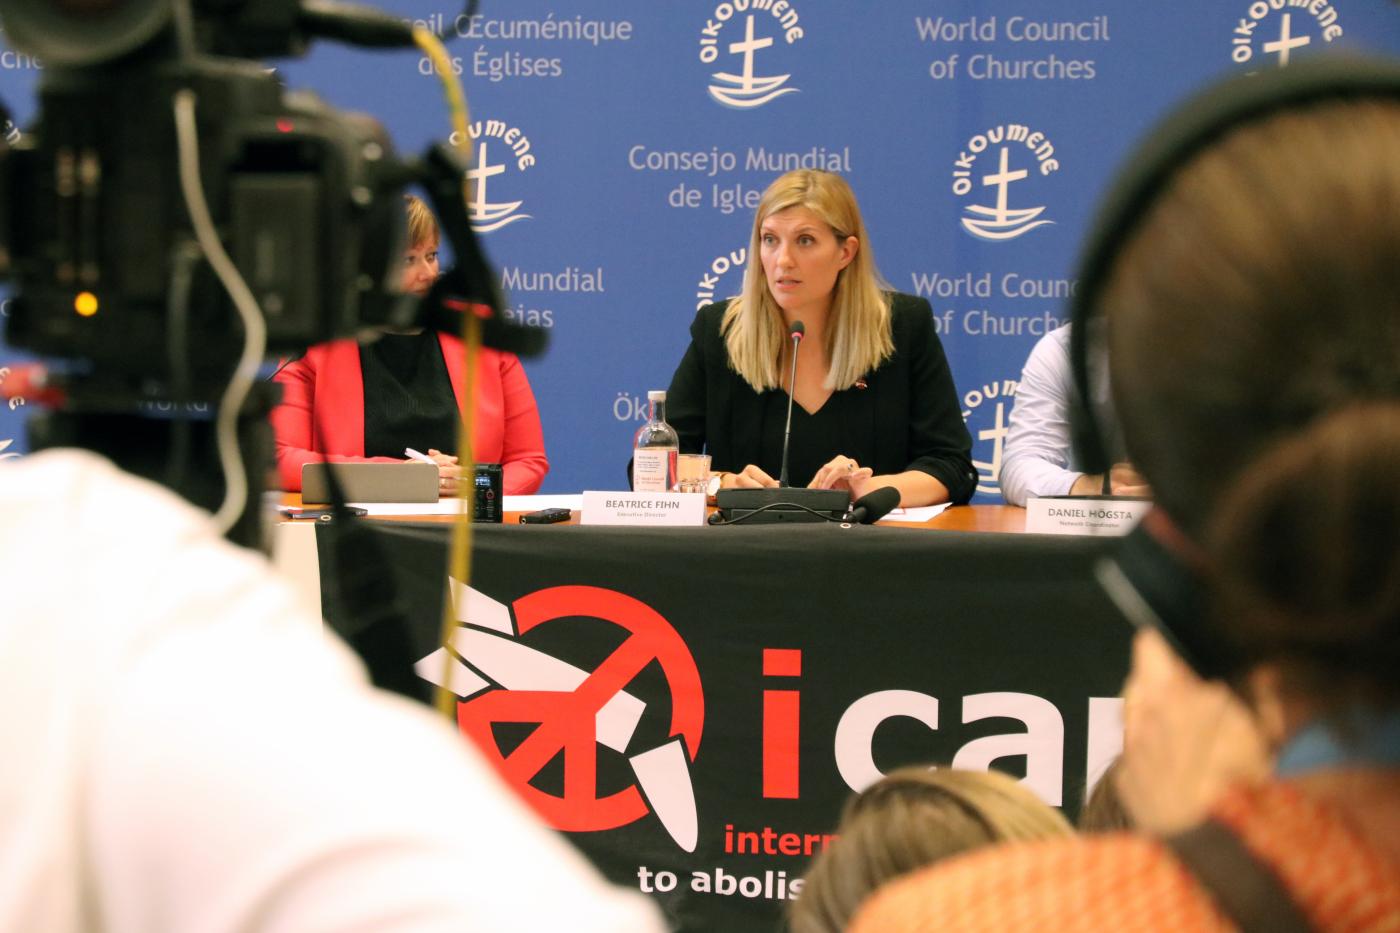 ICAN executive director Beatrice Fihn at the press conference in the Ecumenical centre. Photo: Ivars Kupcis/WCC